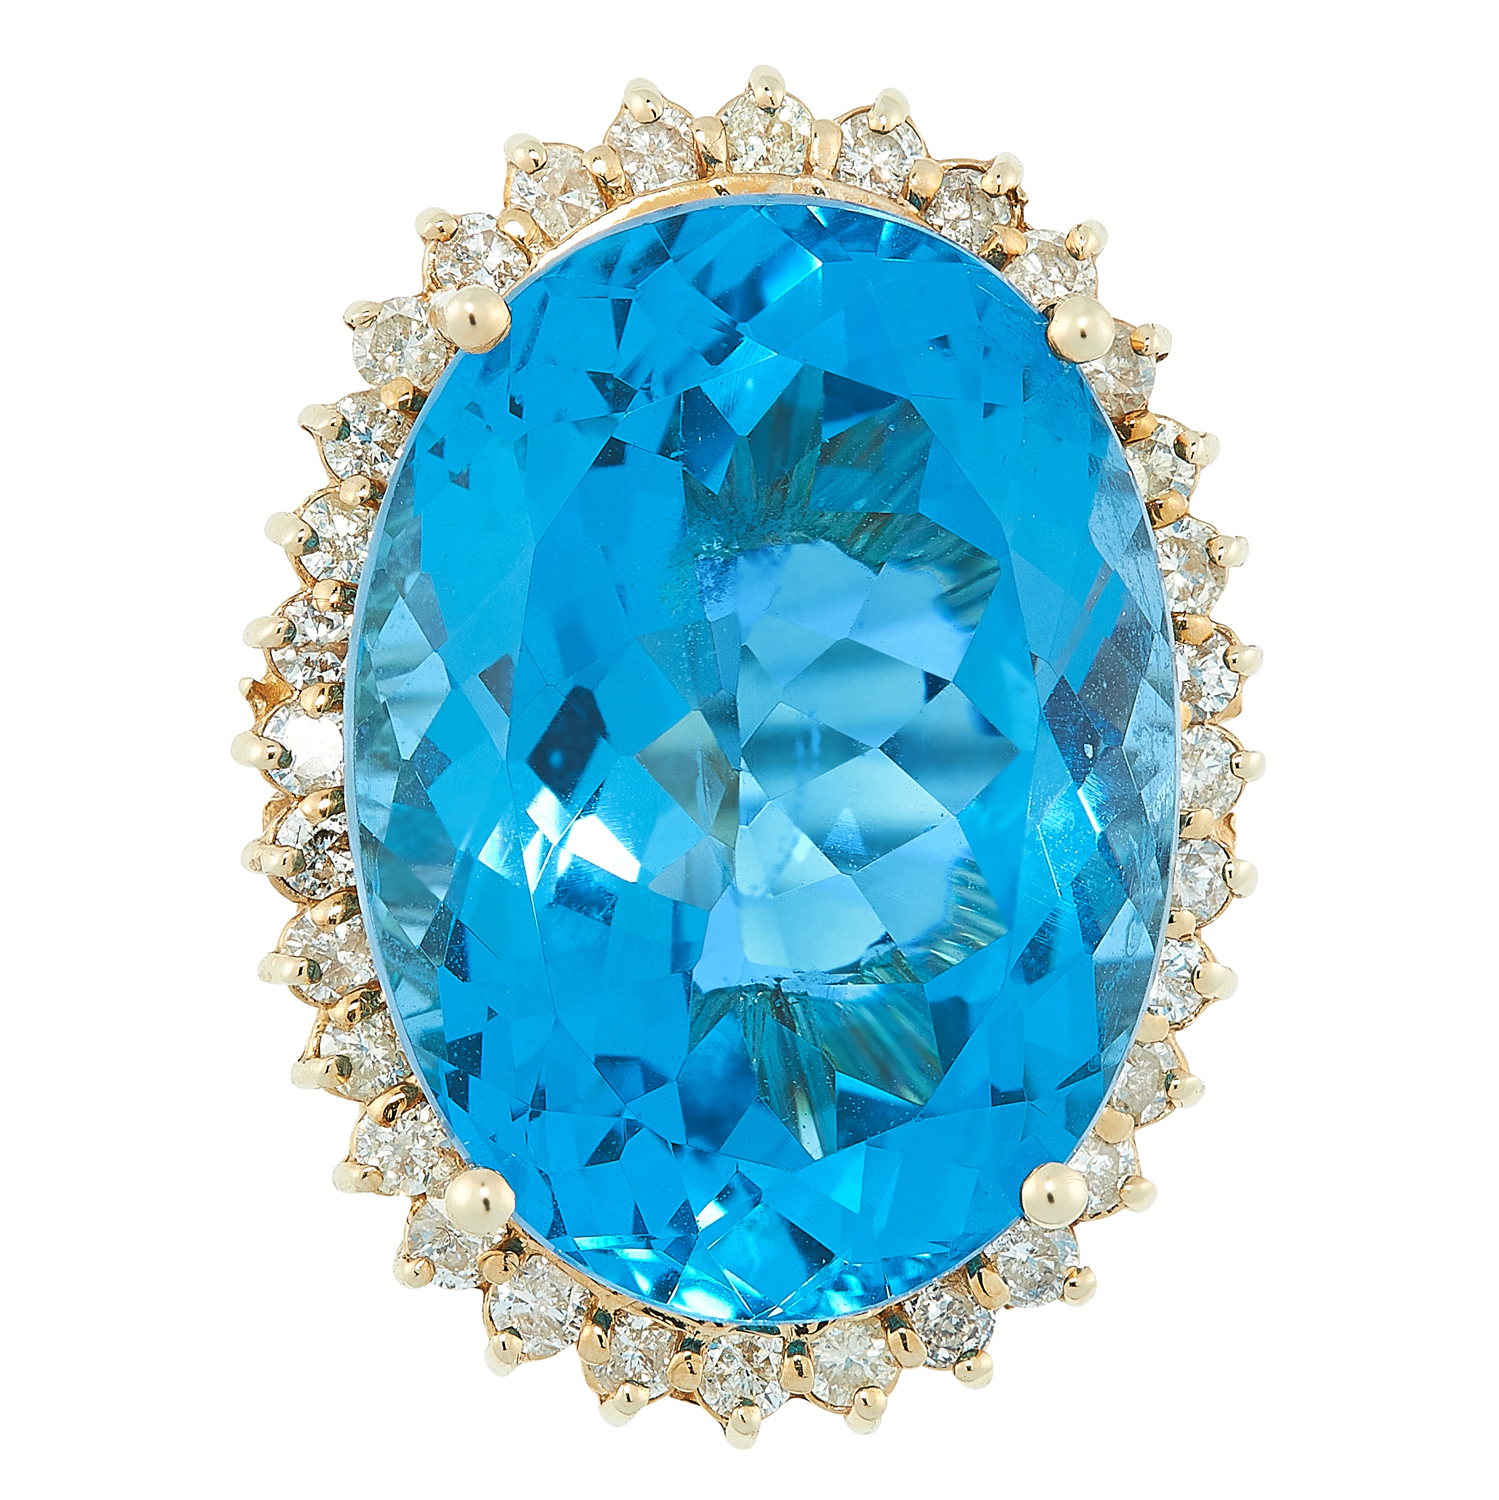 A TOPAZ AND DIAMOND CLUSTER RING in 14ct yellow gold, set with an oval cut topaz of 27.80 carats, in